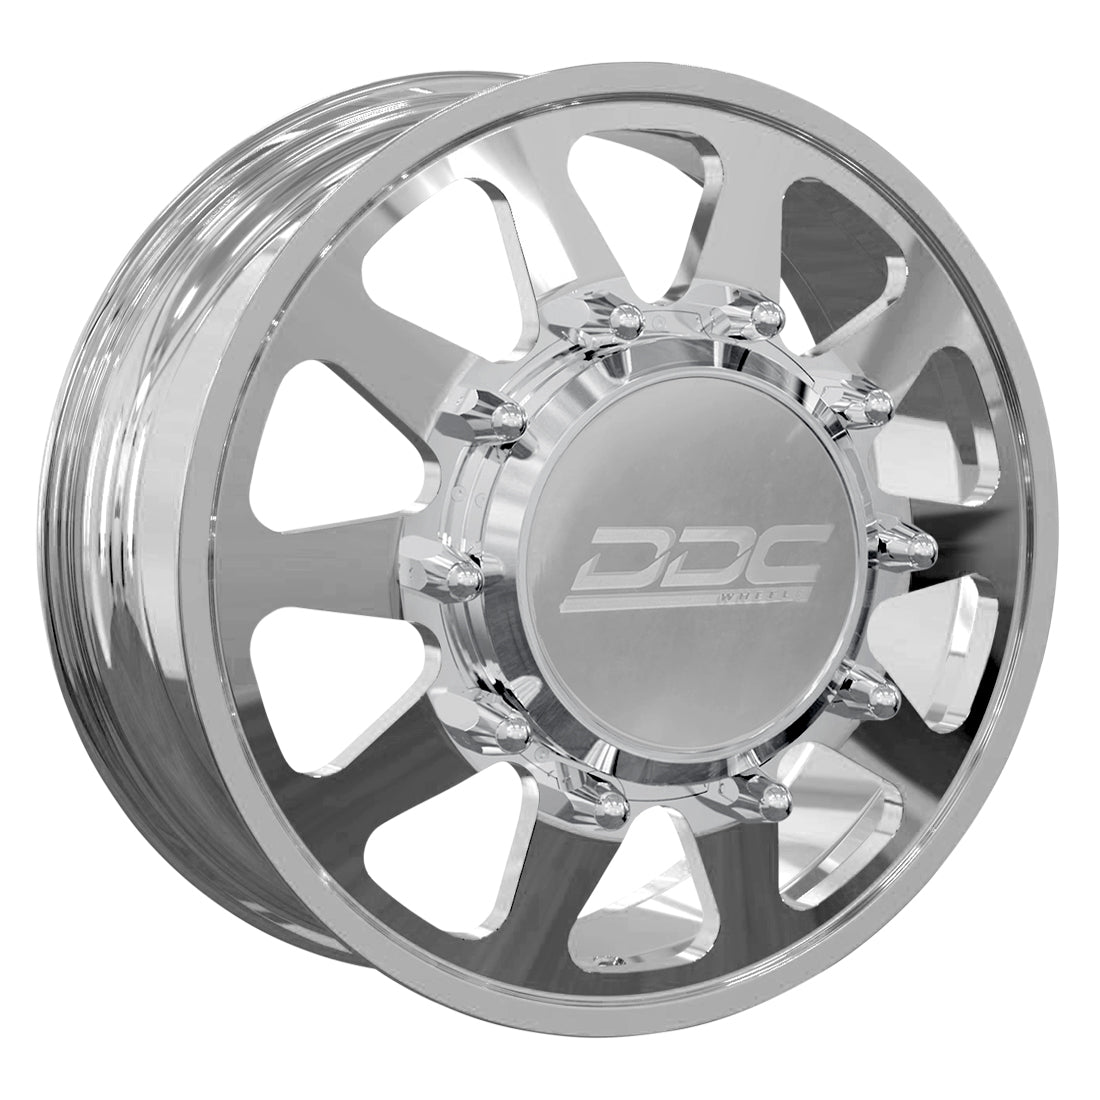 The Ten Polished Open Country R/T 275/65R20 (34.1 x 11)